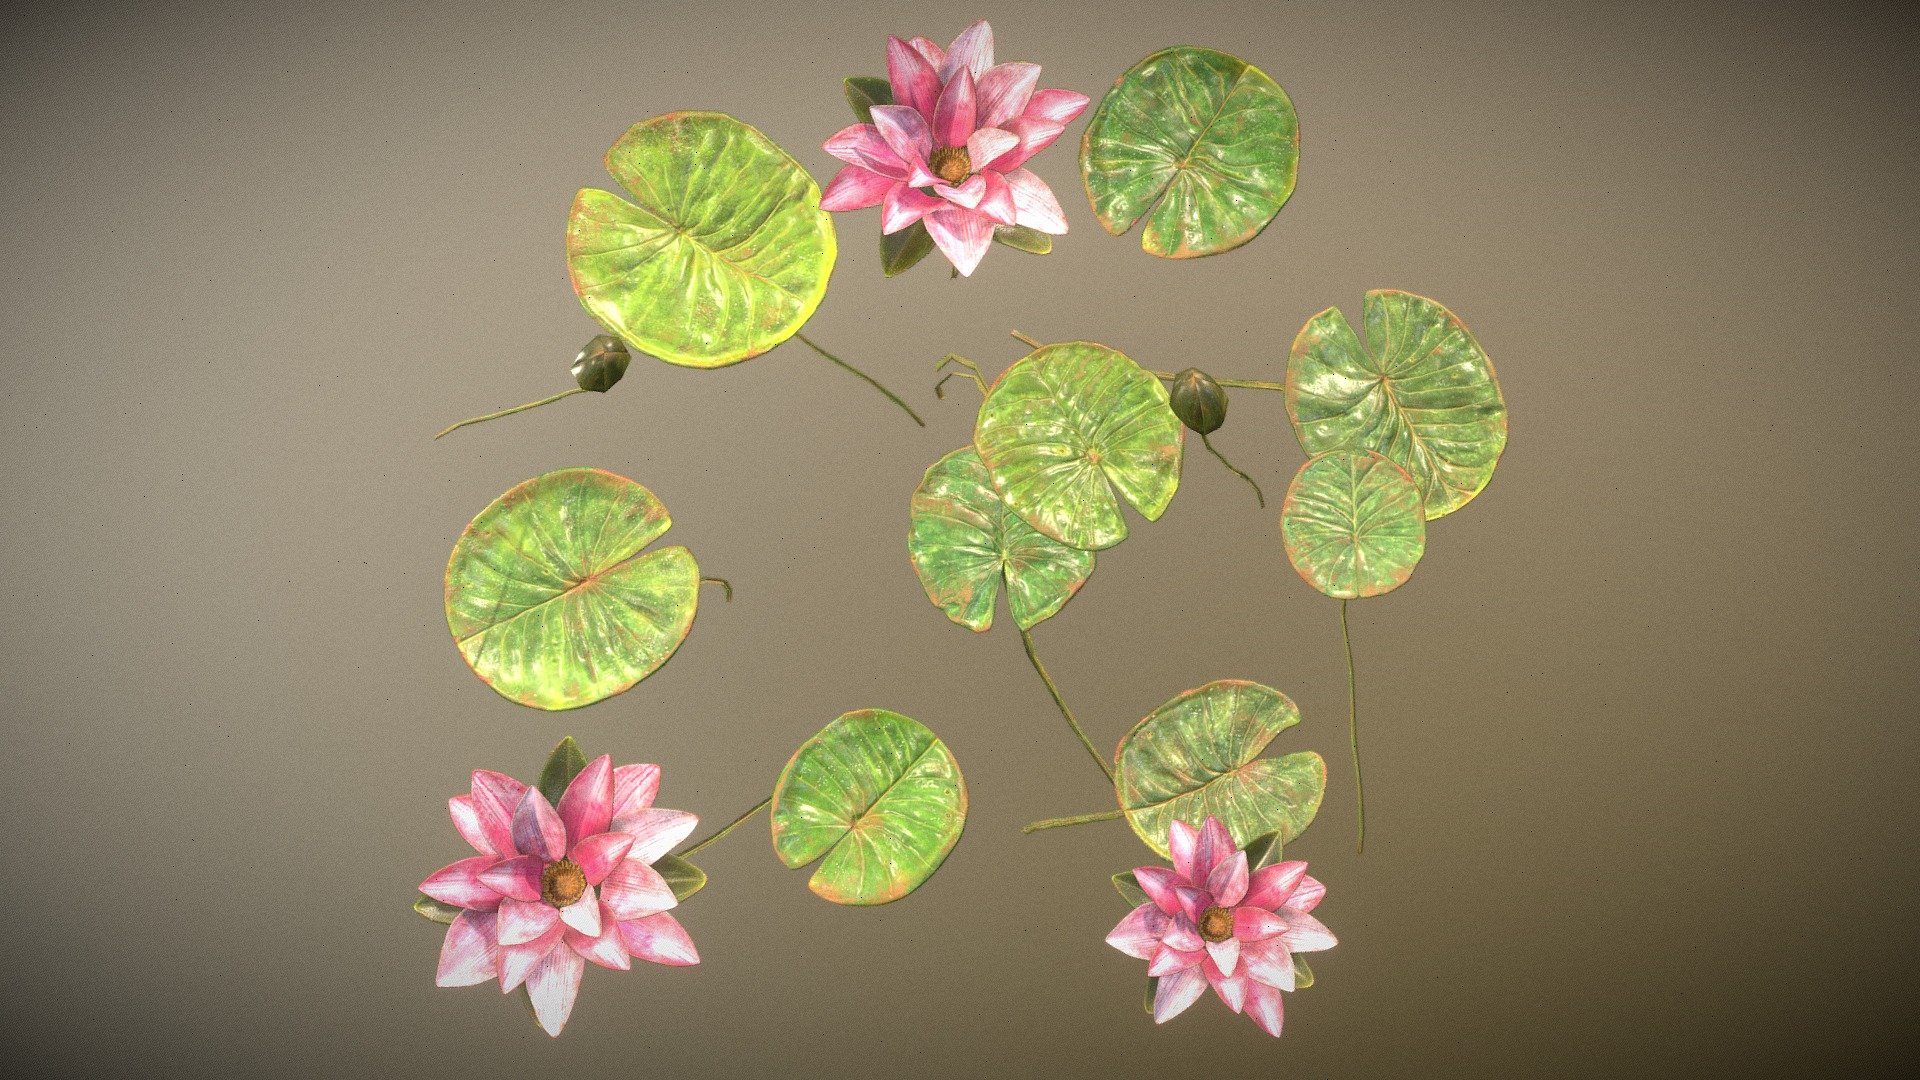 Water Liles, a project I did to practice the process of creating a plant for Games, started from sculpting the high poly water lilies meshes in Zbrush and then baking the mesh maps to a plane and PBR texturing in Substance painter, after that I created the cutout meshes in Maya by manually cutting meshes from a plane and then creating a variation in maya and finally previewed it in Marmoset toolbag.
Project link:
https://www.artstation.com/artwork/QnODOL
I have recorded a YouTube timelapse video showing the whole process:
https://youtu.be/F-HiQMwLufM
I also did a small prerecorded demo session in Arabic for Egypt Game Developers (EGD) for Global Game Jam 2023:
https://youtu.be/OIf7-30WyoY
Video in their channel with Q&amp;A:
https://youtu.be/Okz0YxBTLqk - Water Lilies - Buy Royalty Free 3D model by tareklatif 3d model